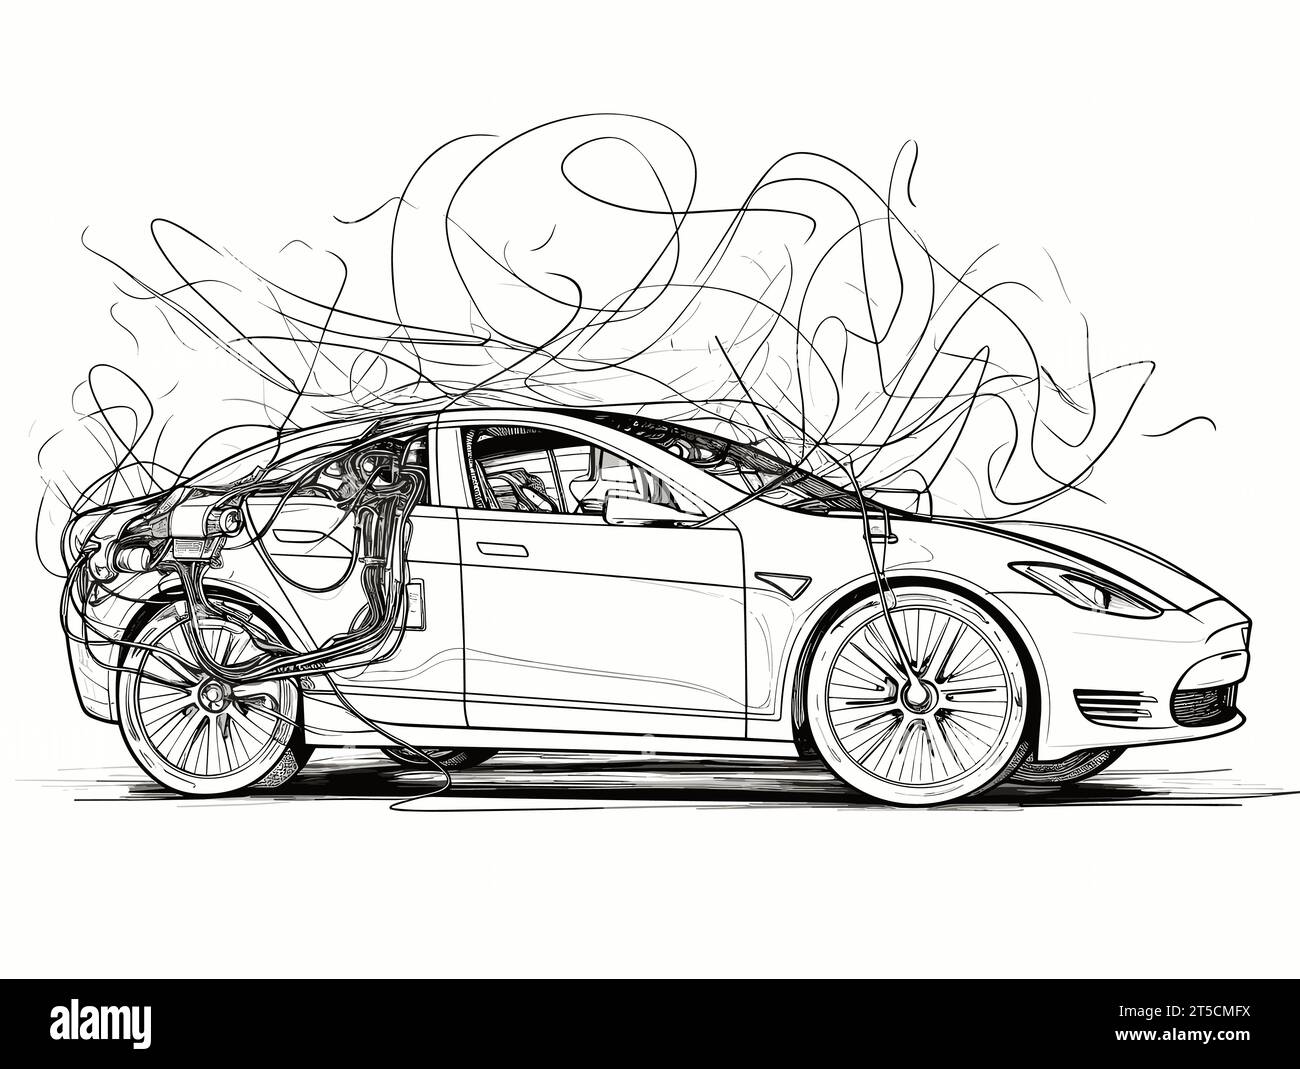 Drawing of Wall box charges electric car illustration separated, sweeping overdrawn lines. Stock Vector